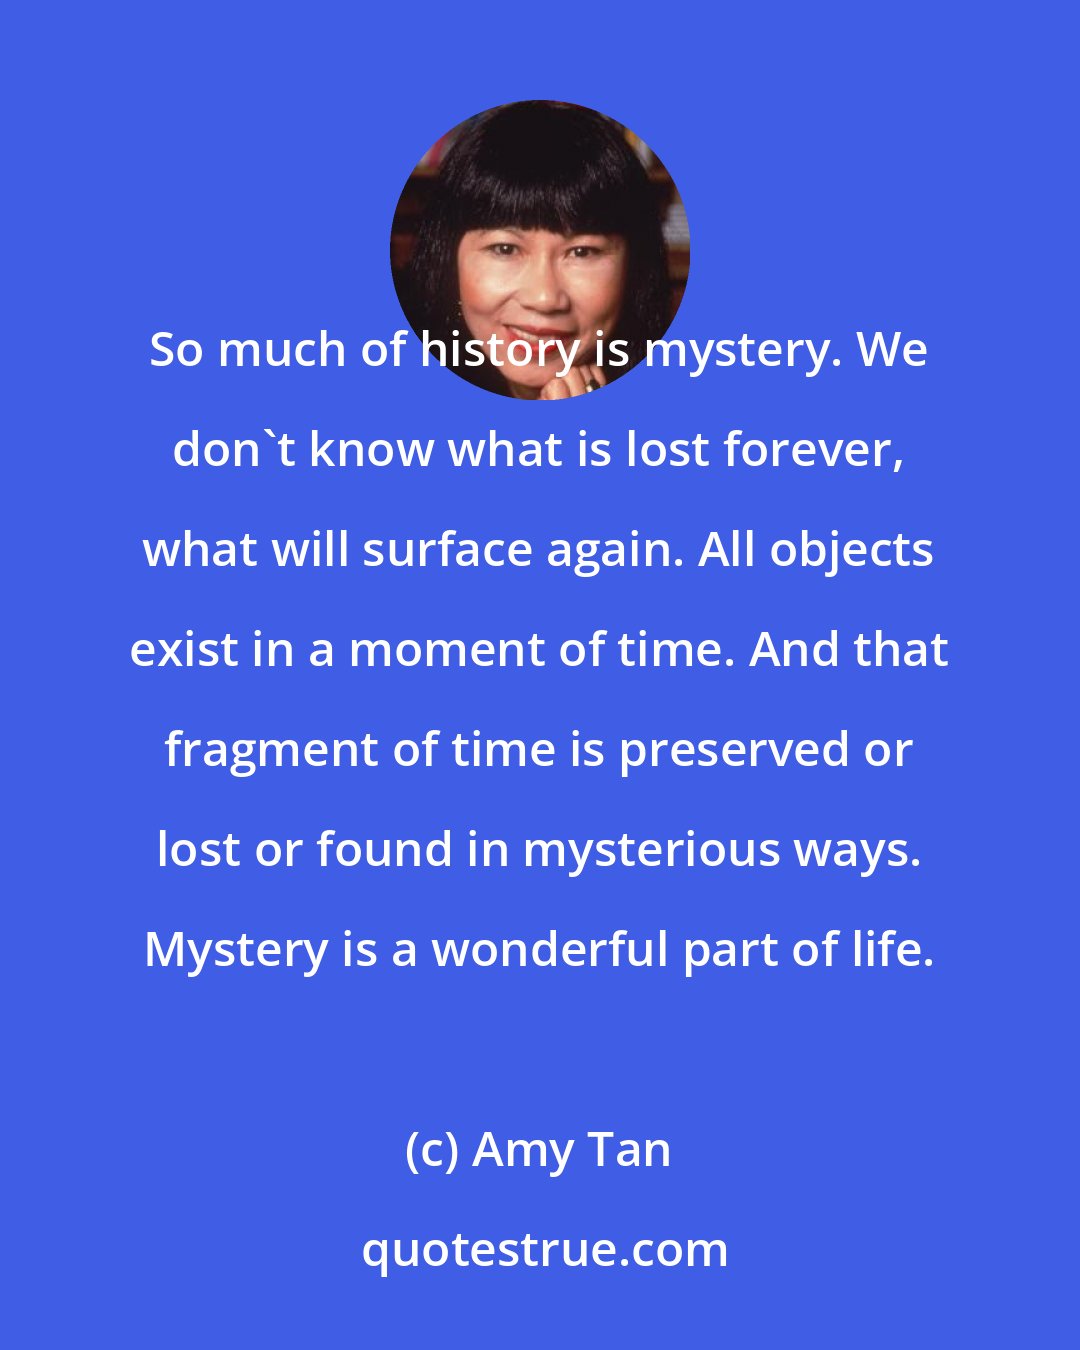 Amy Tan: So much of history is mystery. We don't know what is lost forever, what will surface again. All objects exist in a moment of time. And that fragment of time is preserved or lost or found in mysterious ways. Mystery is a wonderful part of life.